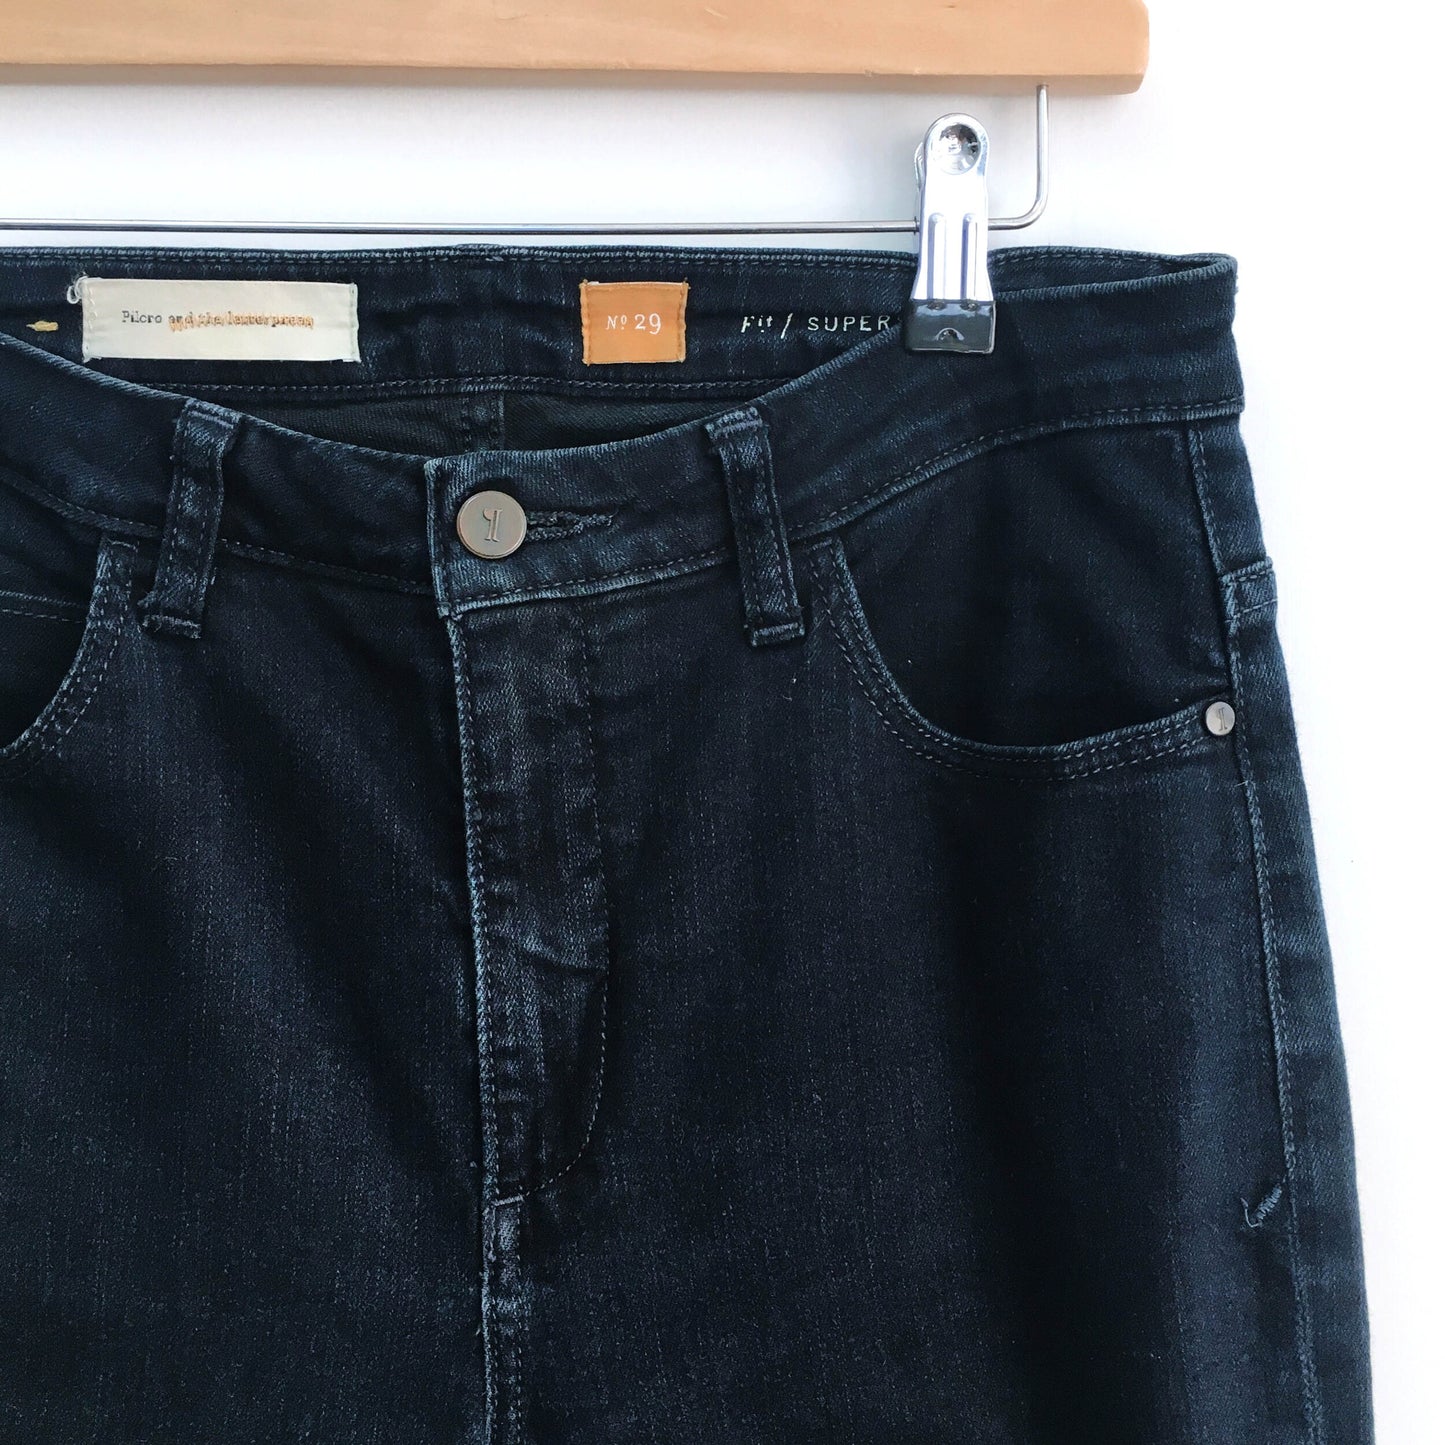 Pilcro and the Letterpress high rise skinny - size 29